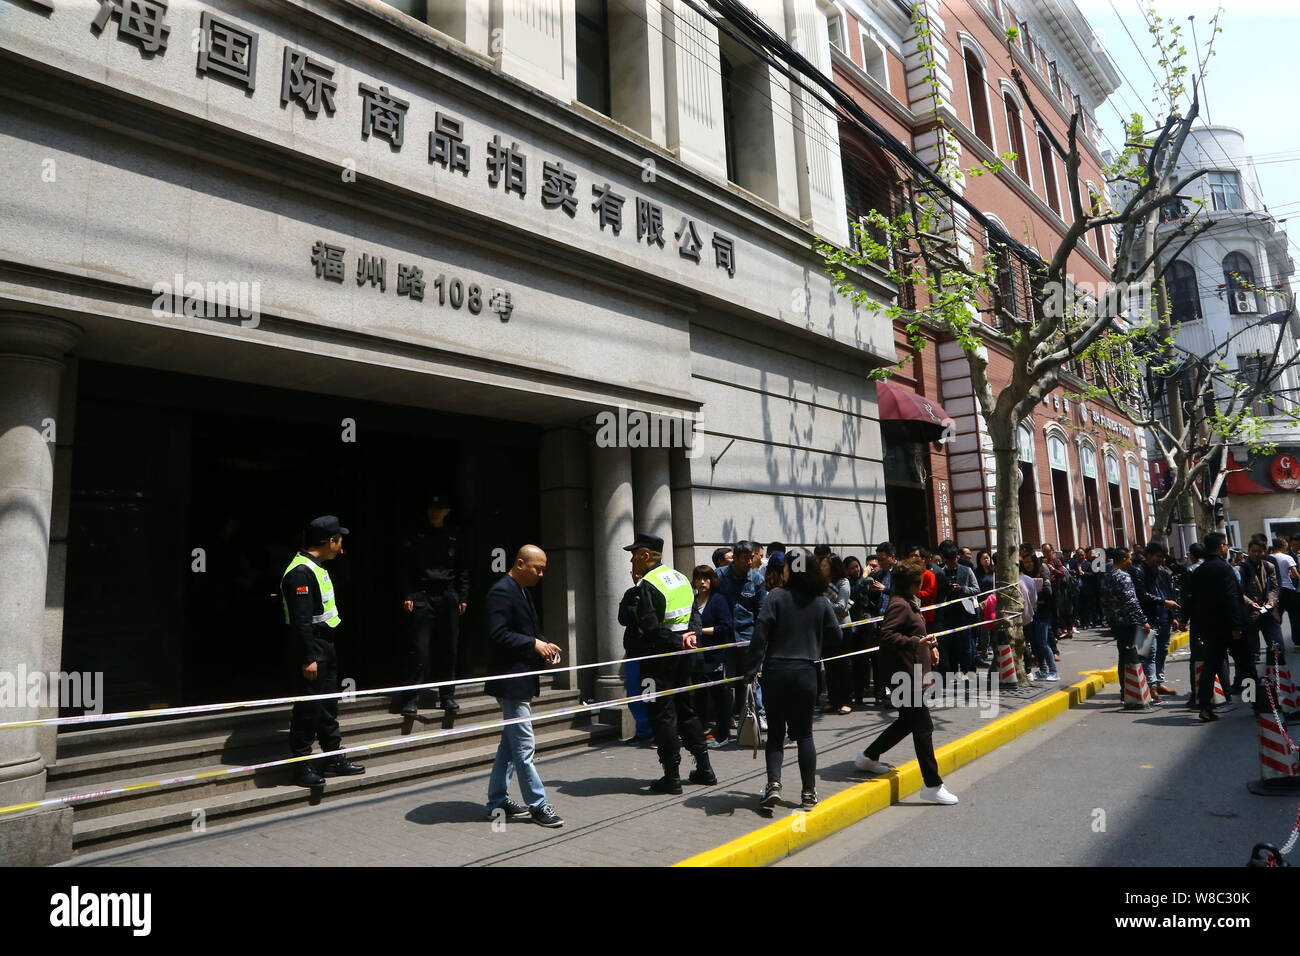 Applicants queue up to purchase the bidding document for vehicle license plate auctions in front of Shanghai International Commodity Auction Co., Ltd. Stock Photo